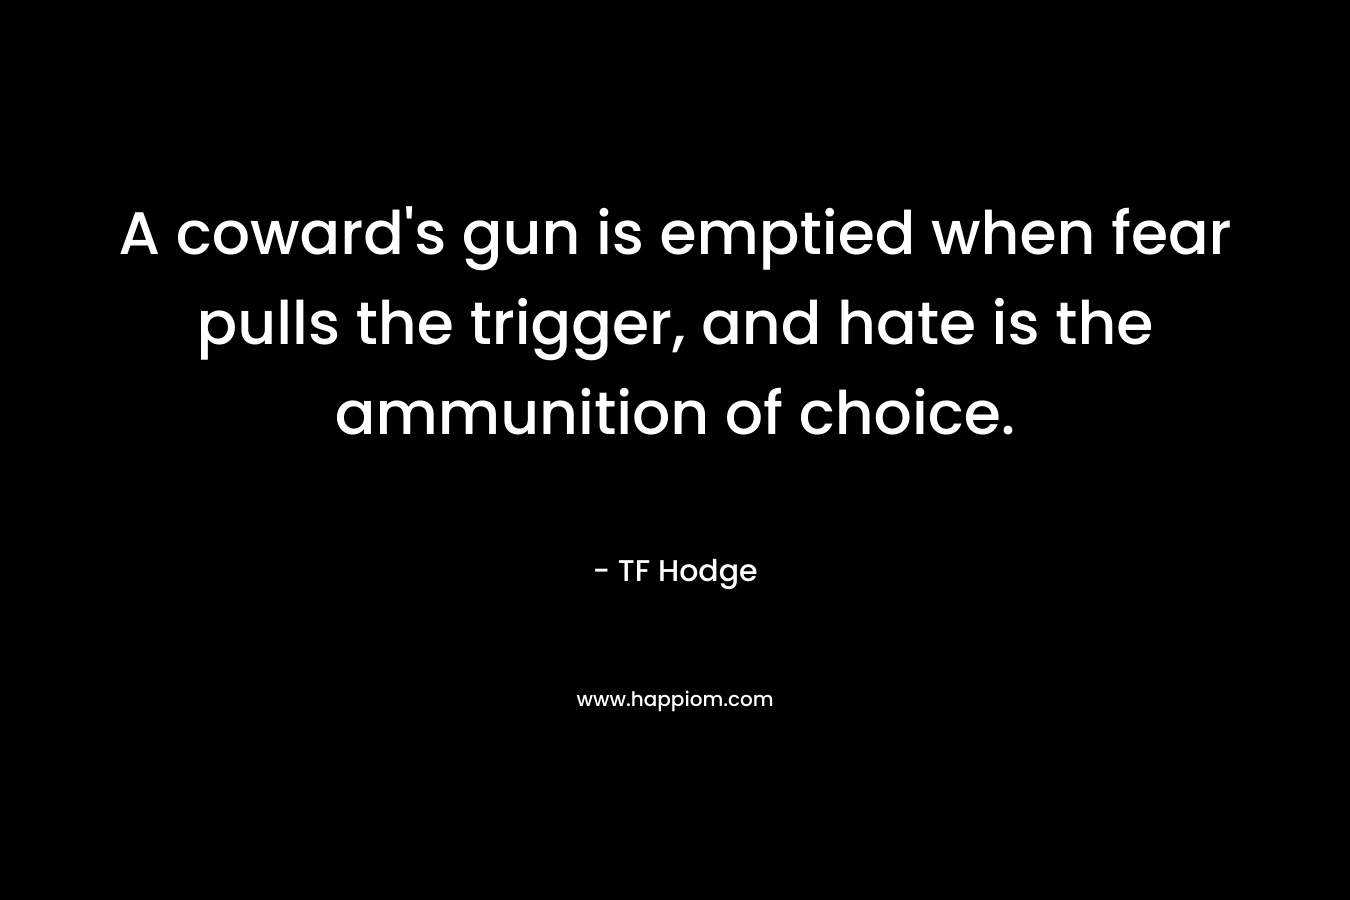 A coward's gun is emptied when fear pulls the trigger, and hate is the ammunition of choice.